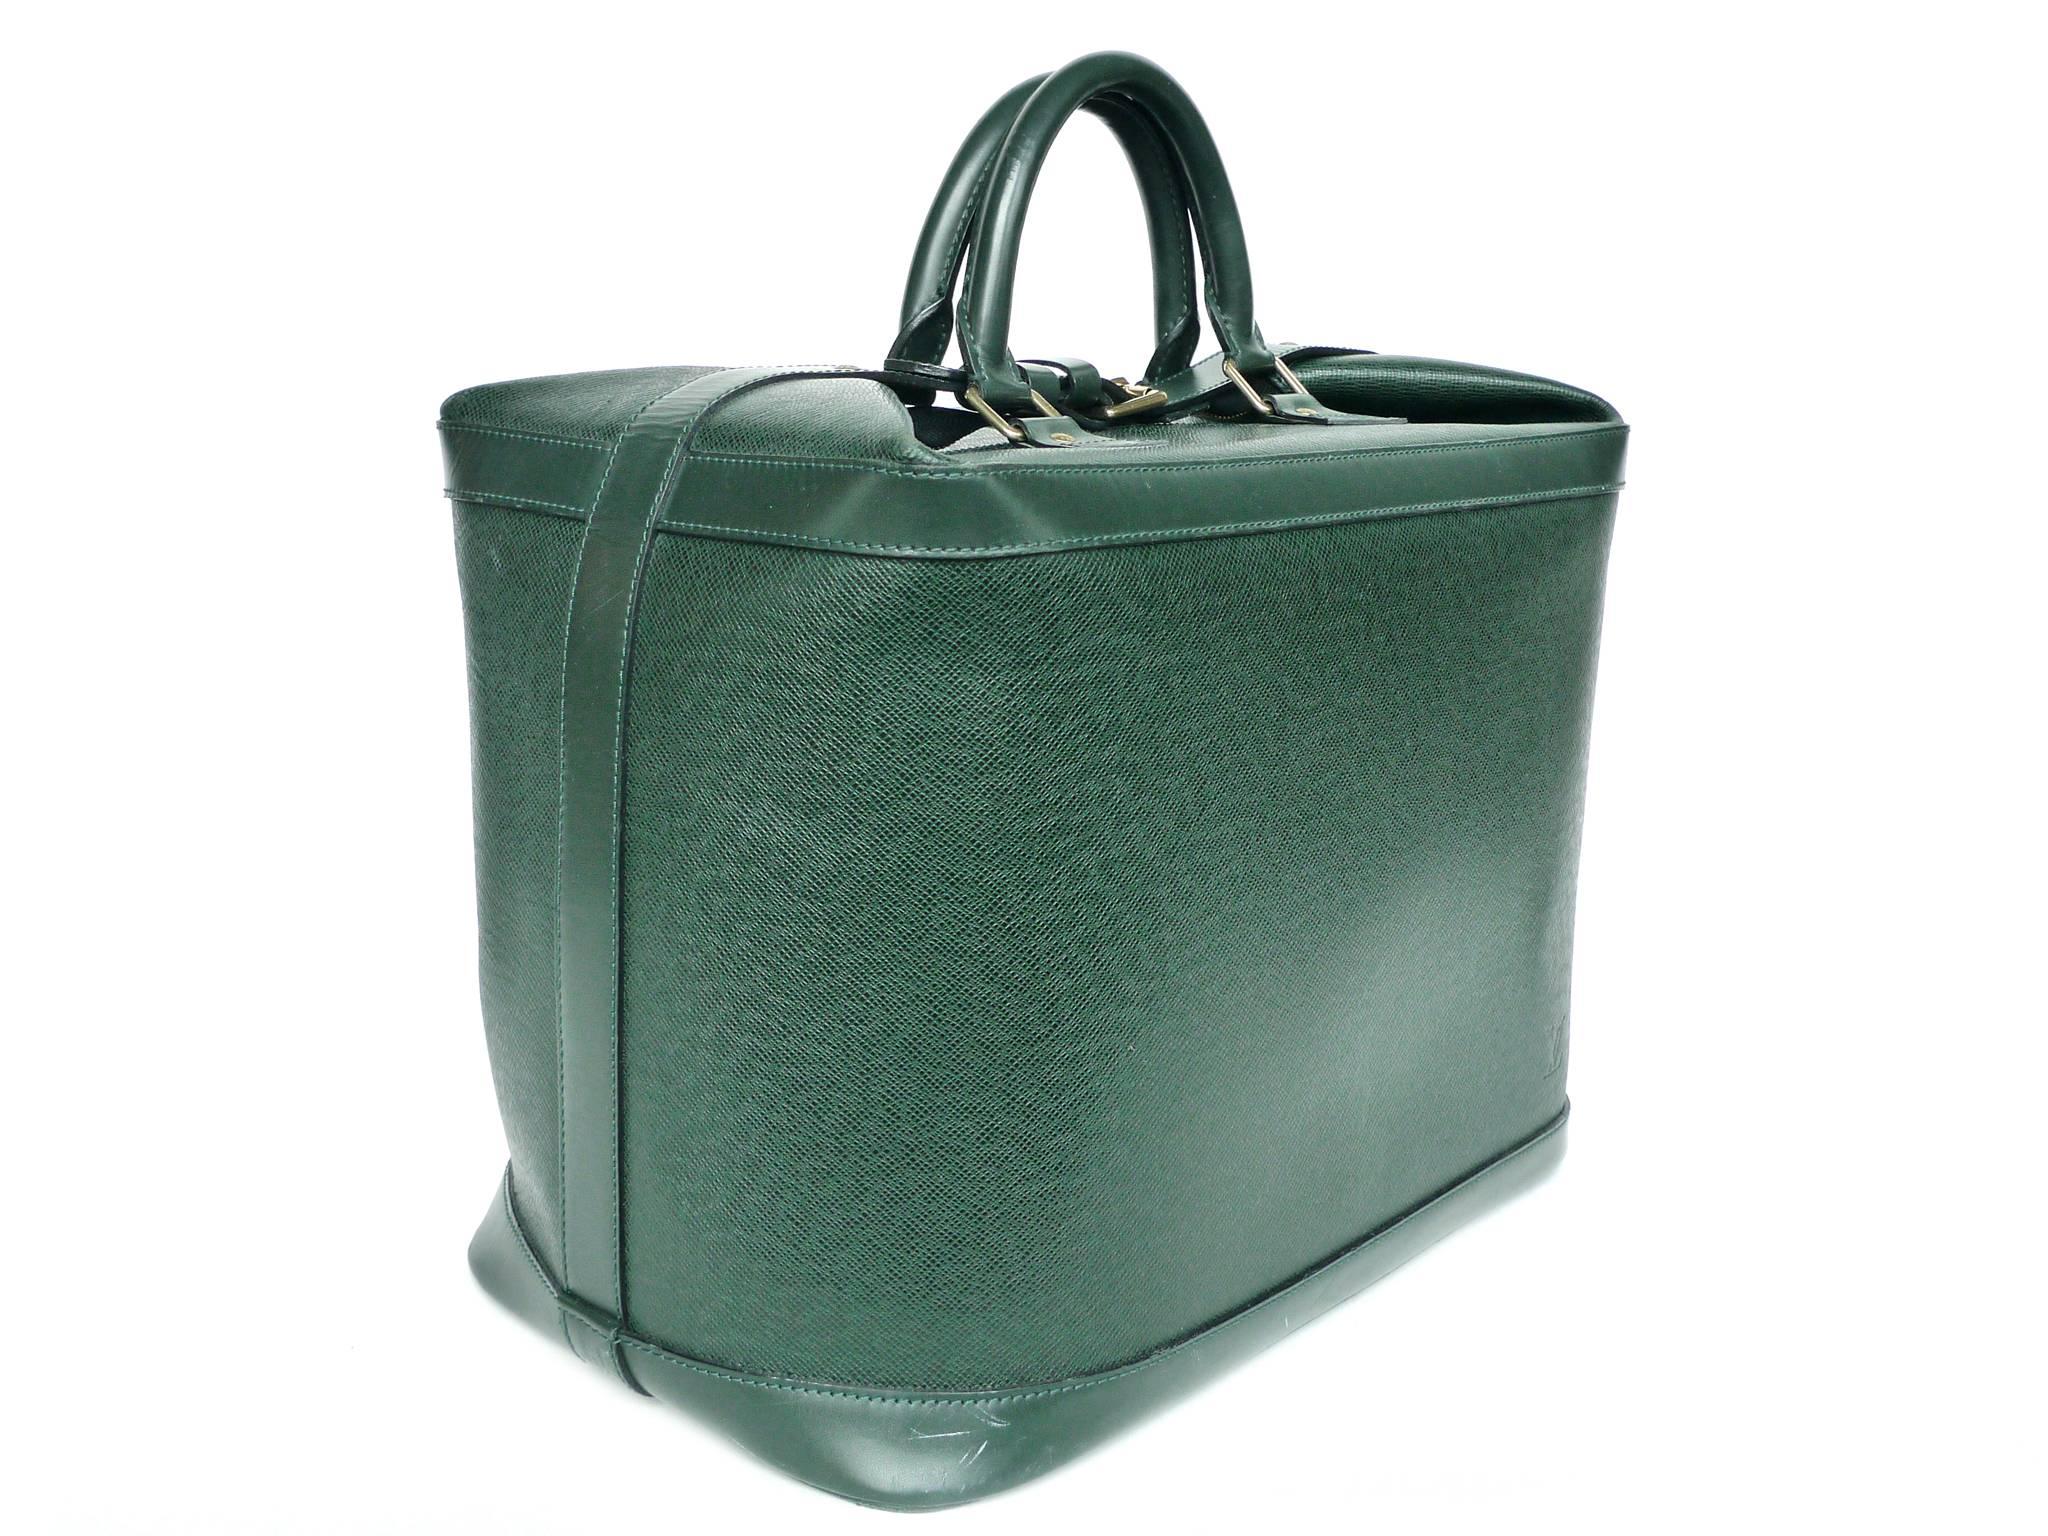 This Louis Vuitton Cruiser 40 travel bag is crafted from durable, soft Taiga leather in a rich hunter green color. Gold-toned brass hardware beautifully complement the compact box shape. The bag's interior is done in a green suede fabric. Other